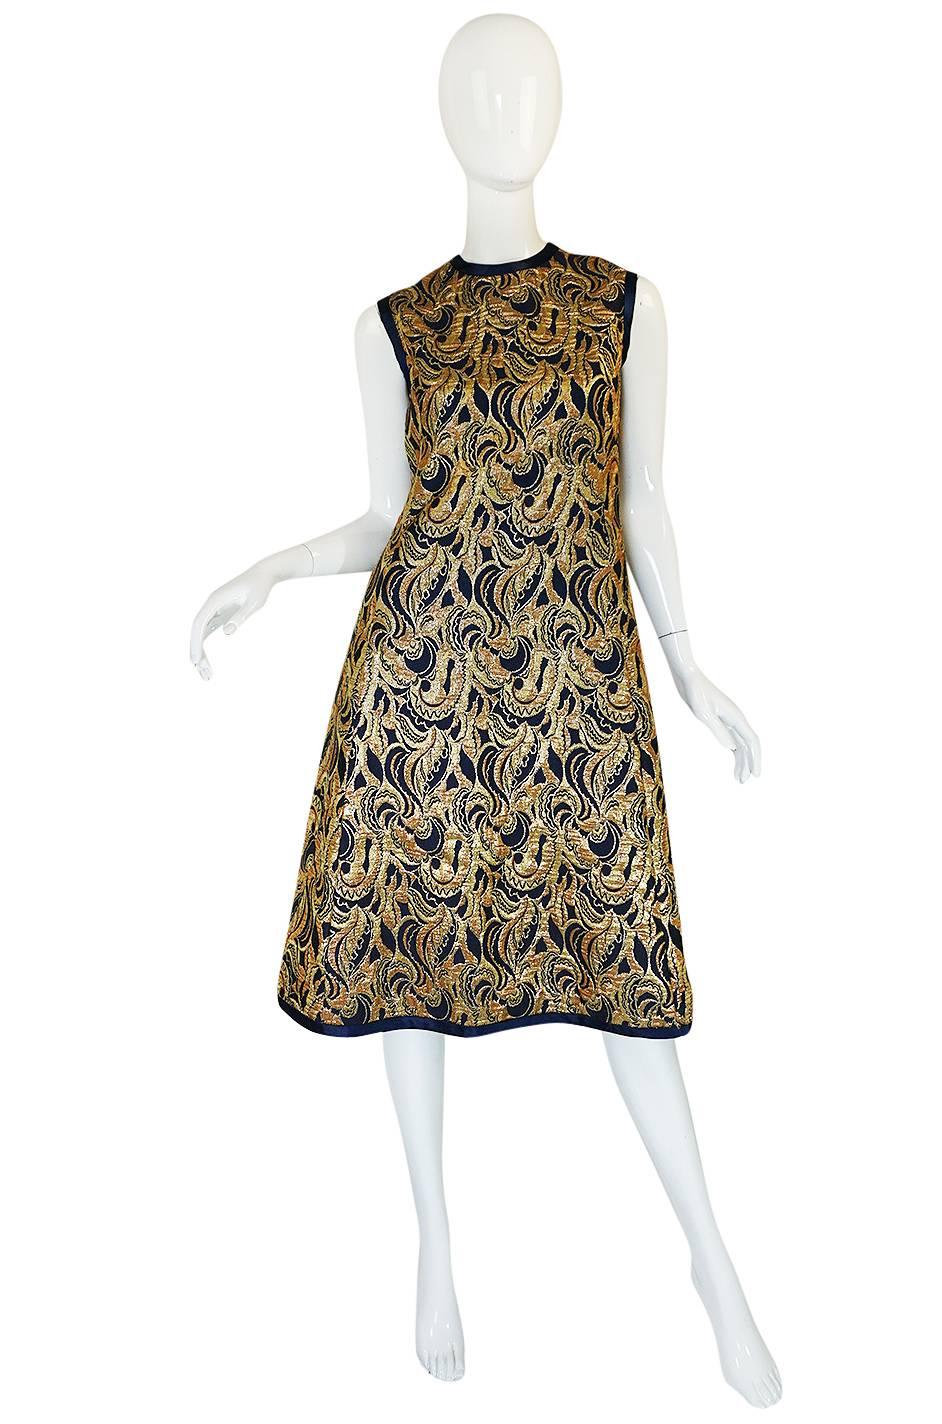 

This is an absolutely gorgeous Malcolm Starr dress & jacket that has been made out of a wonderful metallic fabric with hues of gold and copper swirling over a navy base. The dress has a very simple and easy to wear cut that is classic Malcolm